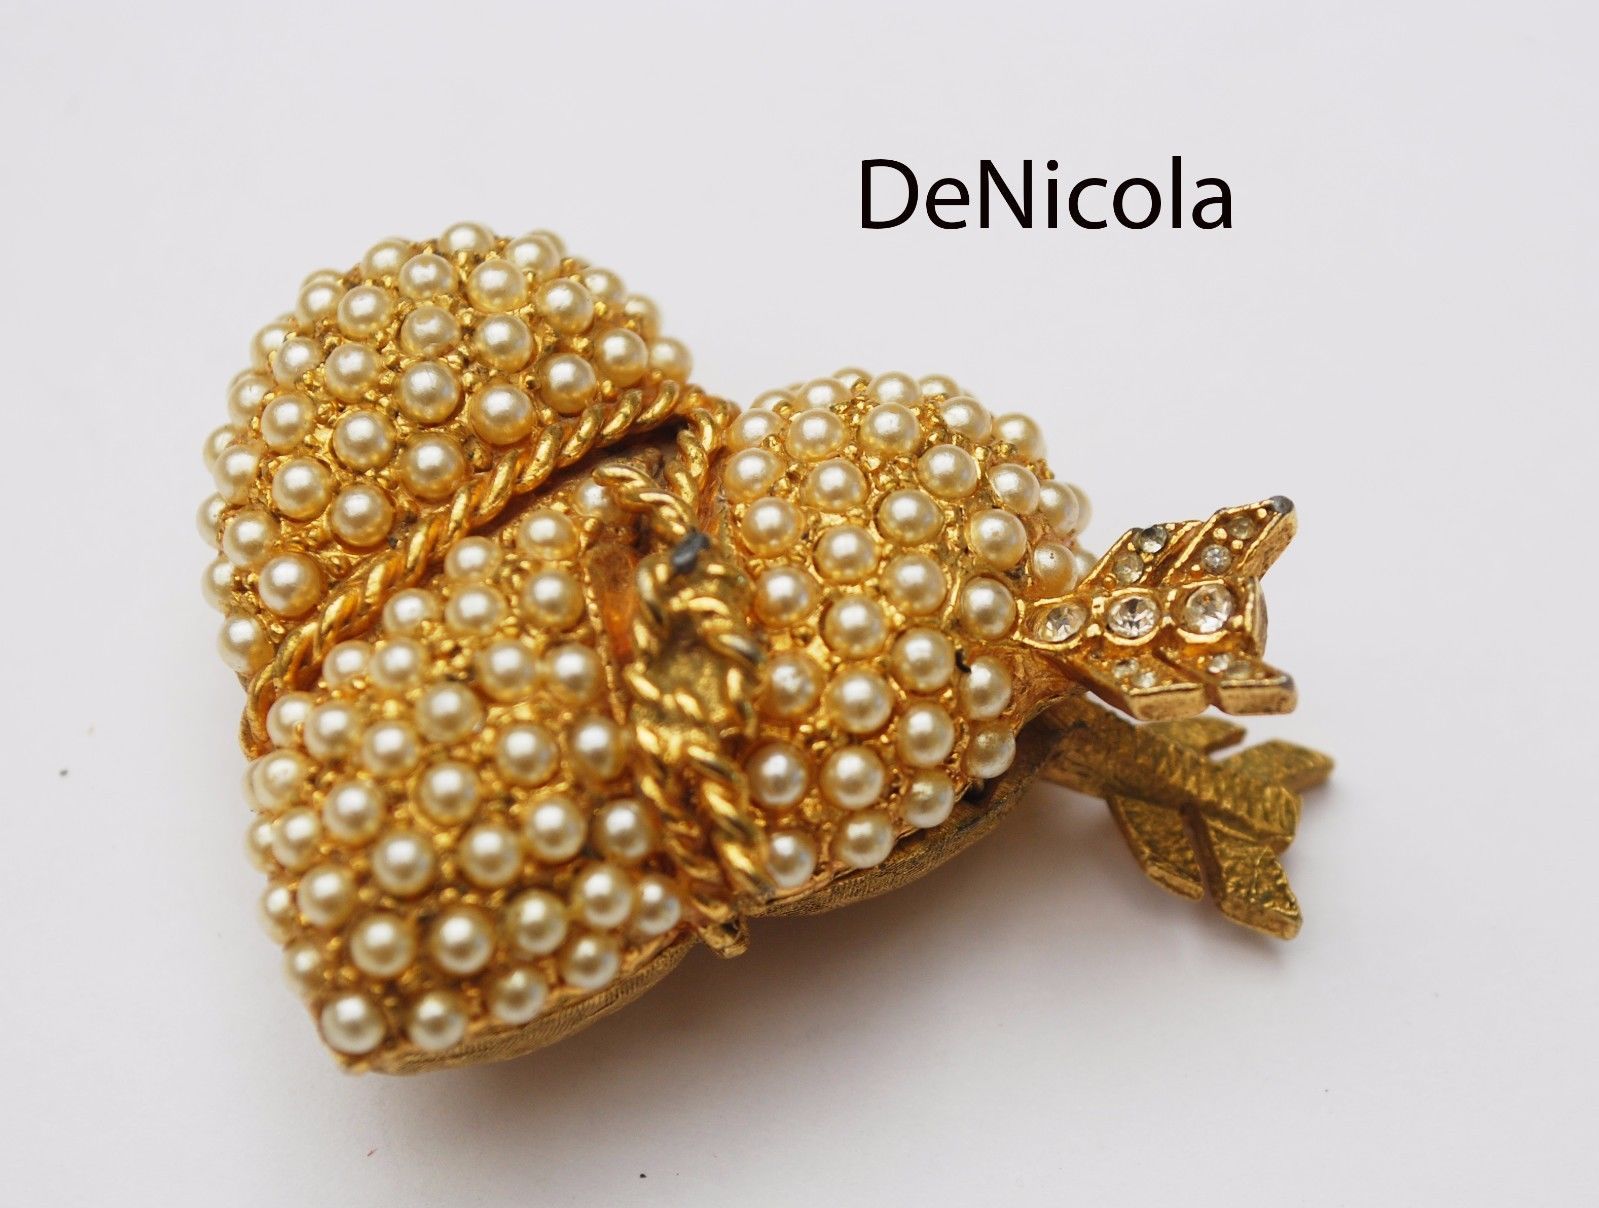 Primary image for DE NICOLA Gold Plated Pearl Rhinestone HEART Trinket Pill Box - Vintage